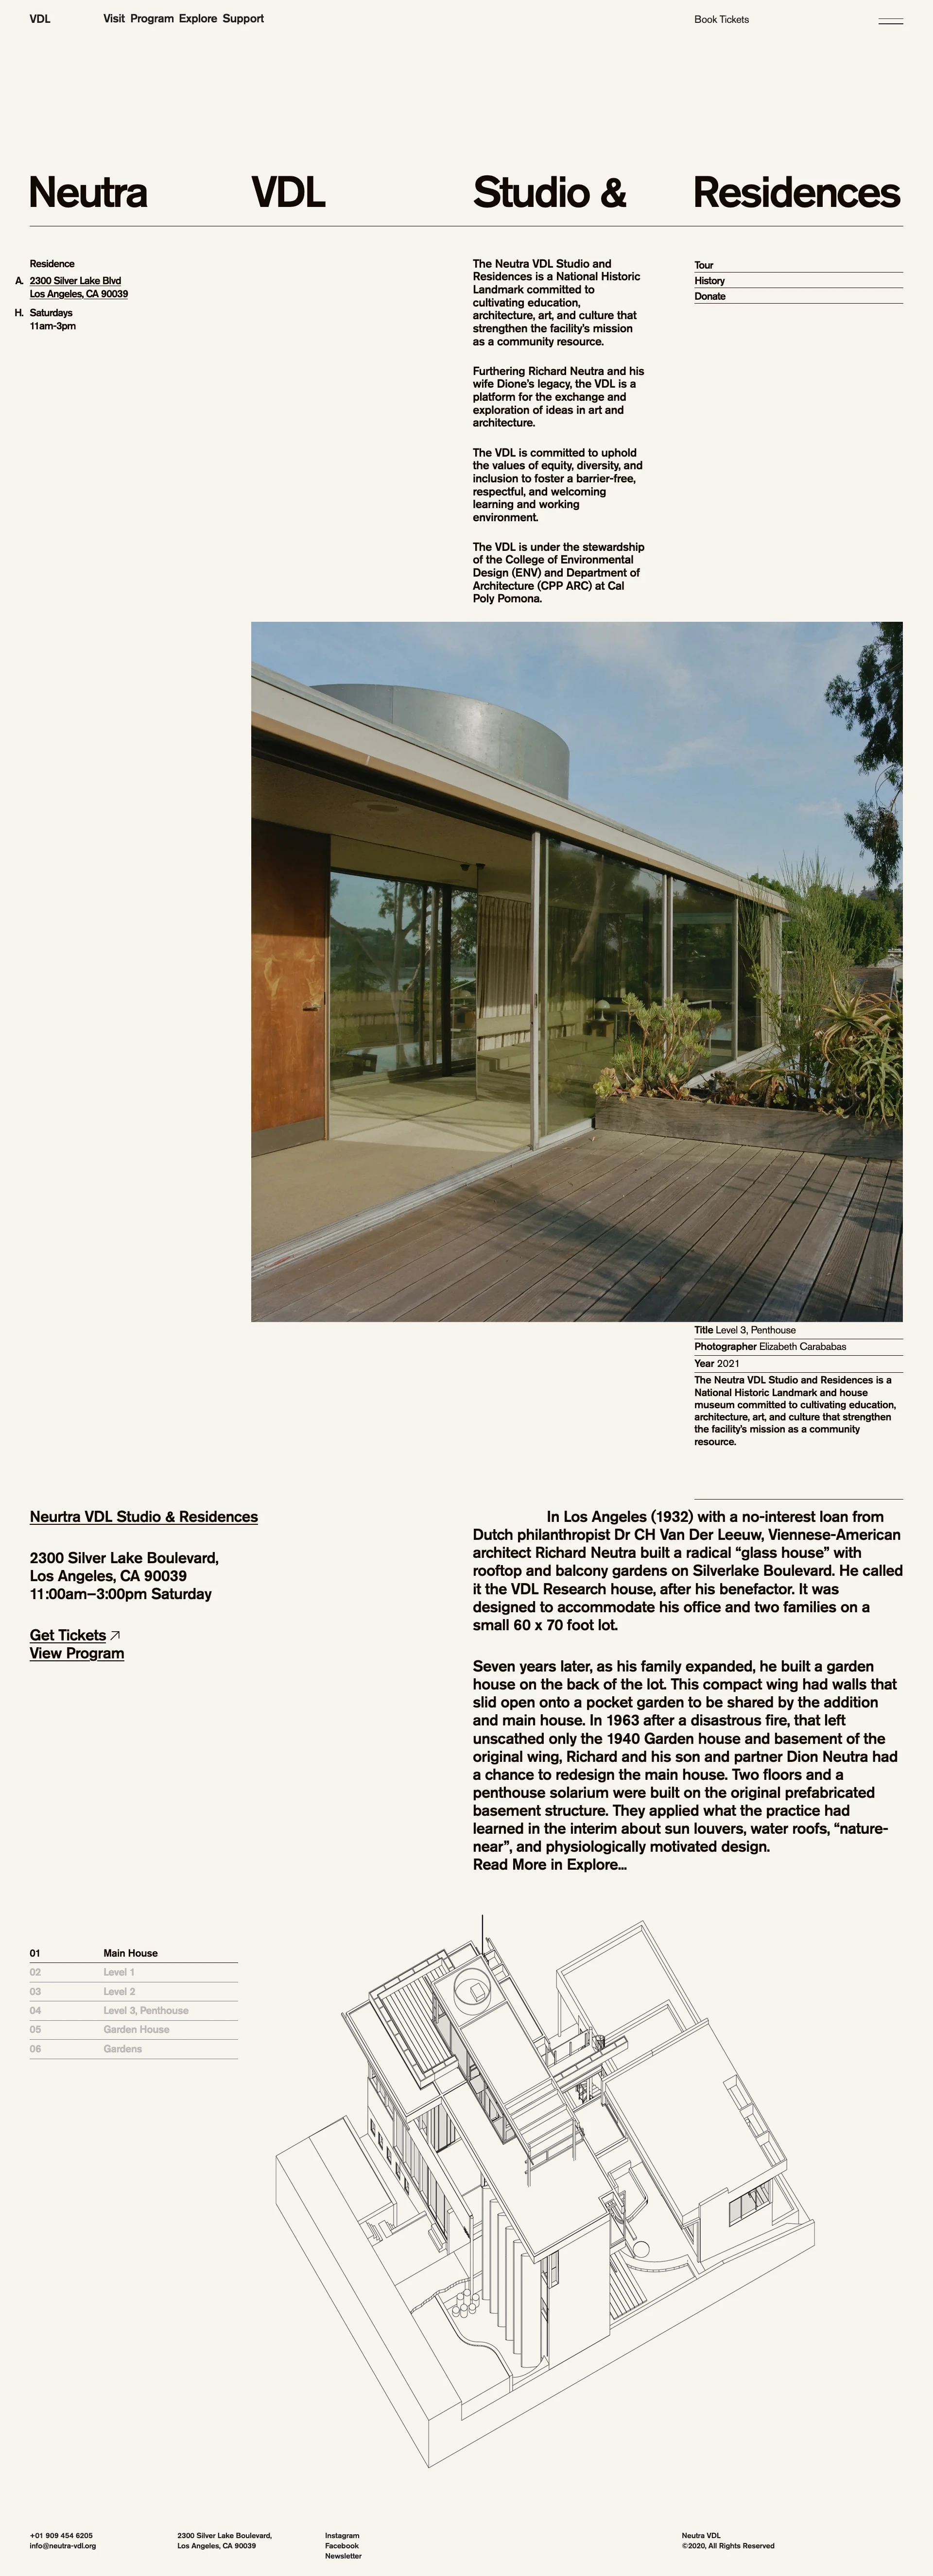 Neutra VDL Landing Page Example: The Neutra VDL Studio and Residences is a National Historic Landmark and house museum committed to cultivating education, architecture, art, and culture that strengthen the facility’s mission as a community resource.